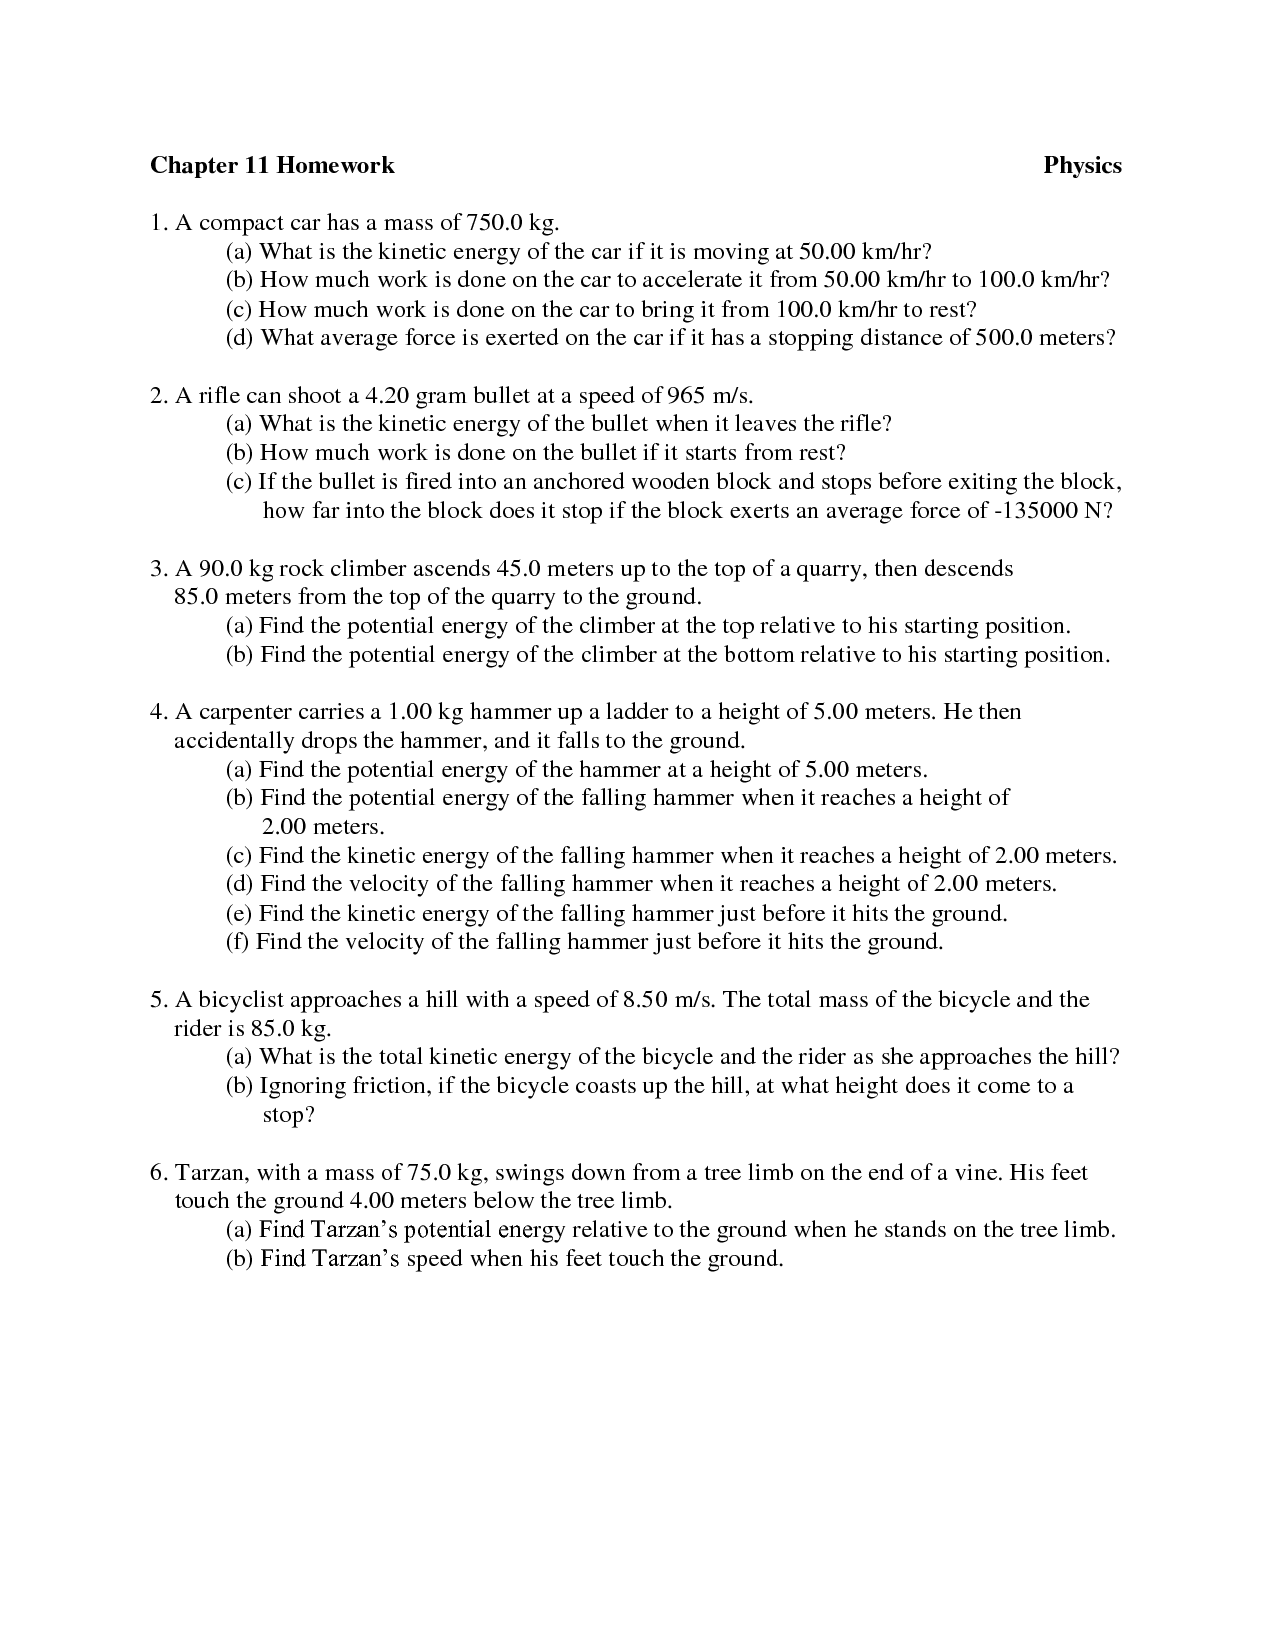 Potential and Kinetic Energy Worksheet Answers Image